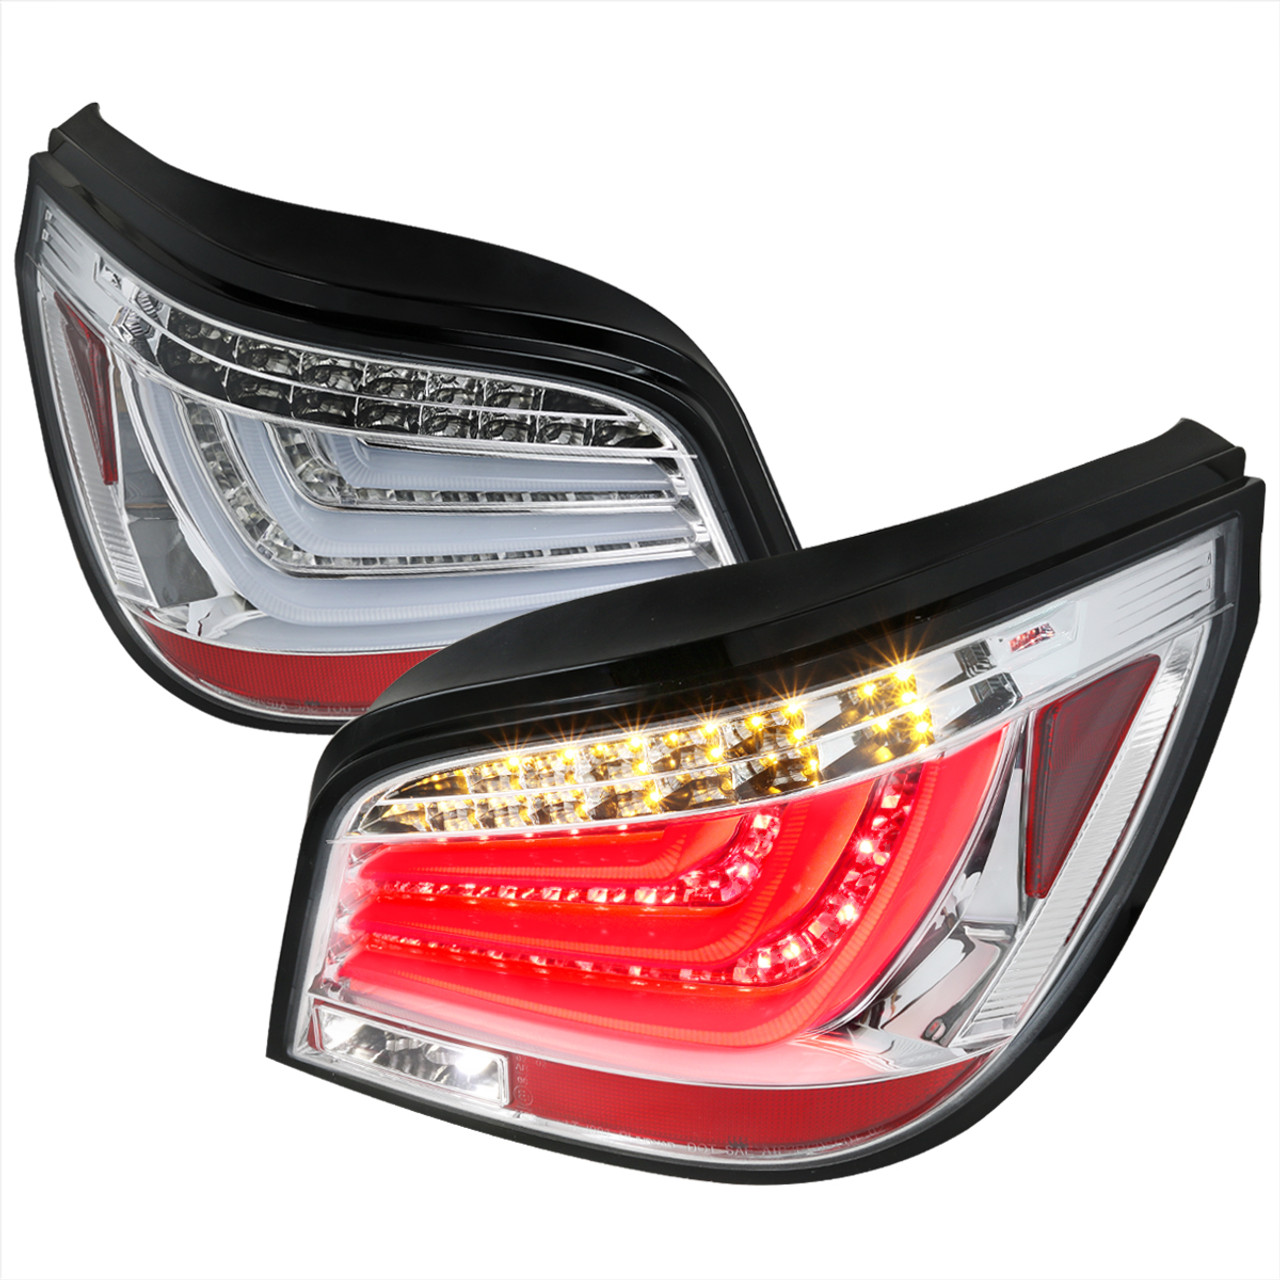 Spec-D Tuning Bmw E60 5 Series Red Clear Led Tail Lights - LT-E6004RLED-TM